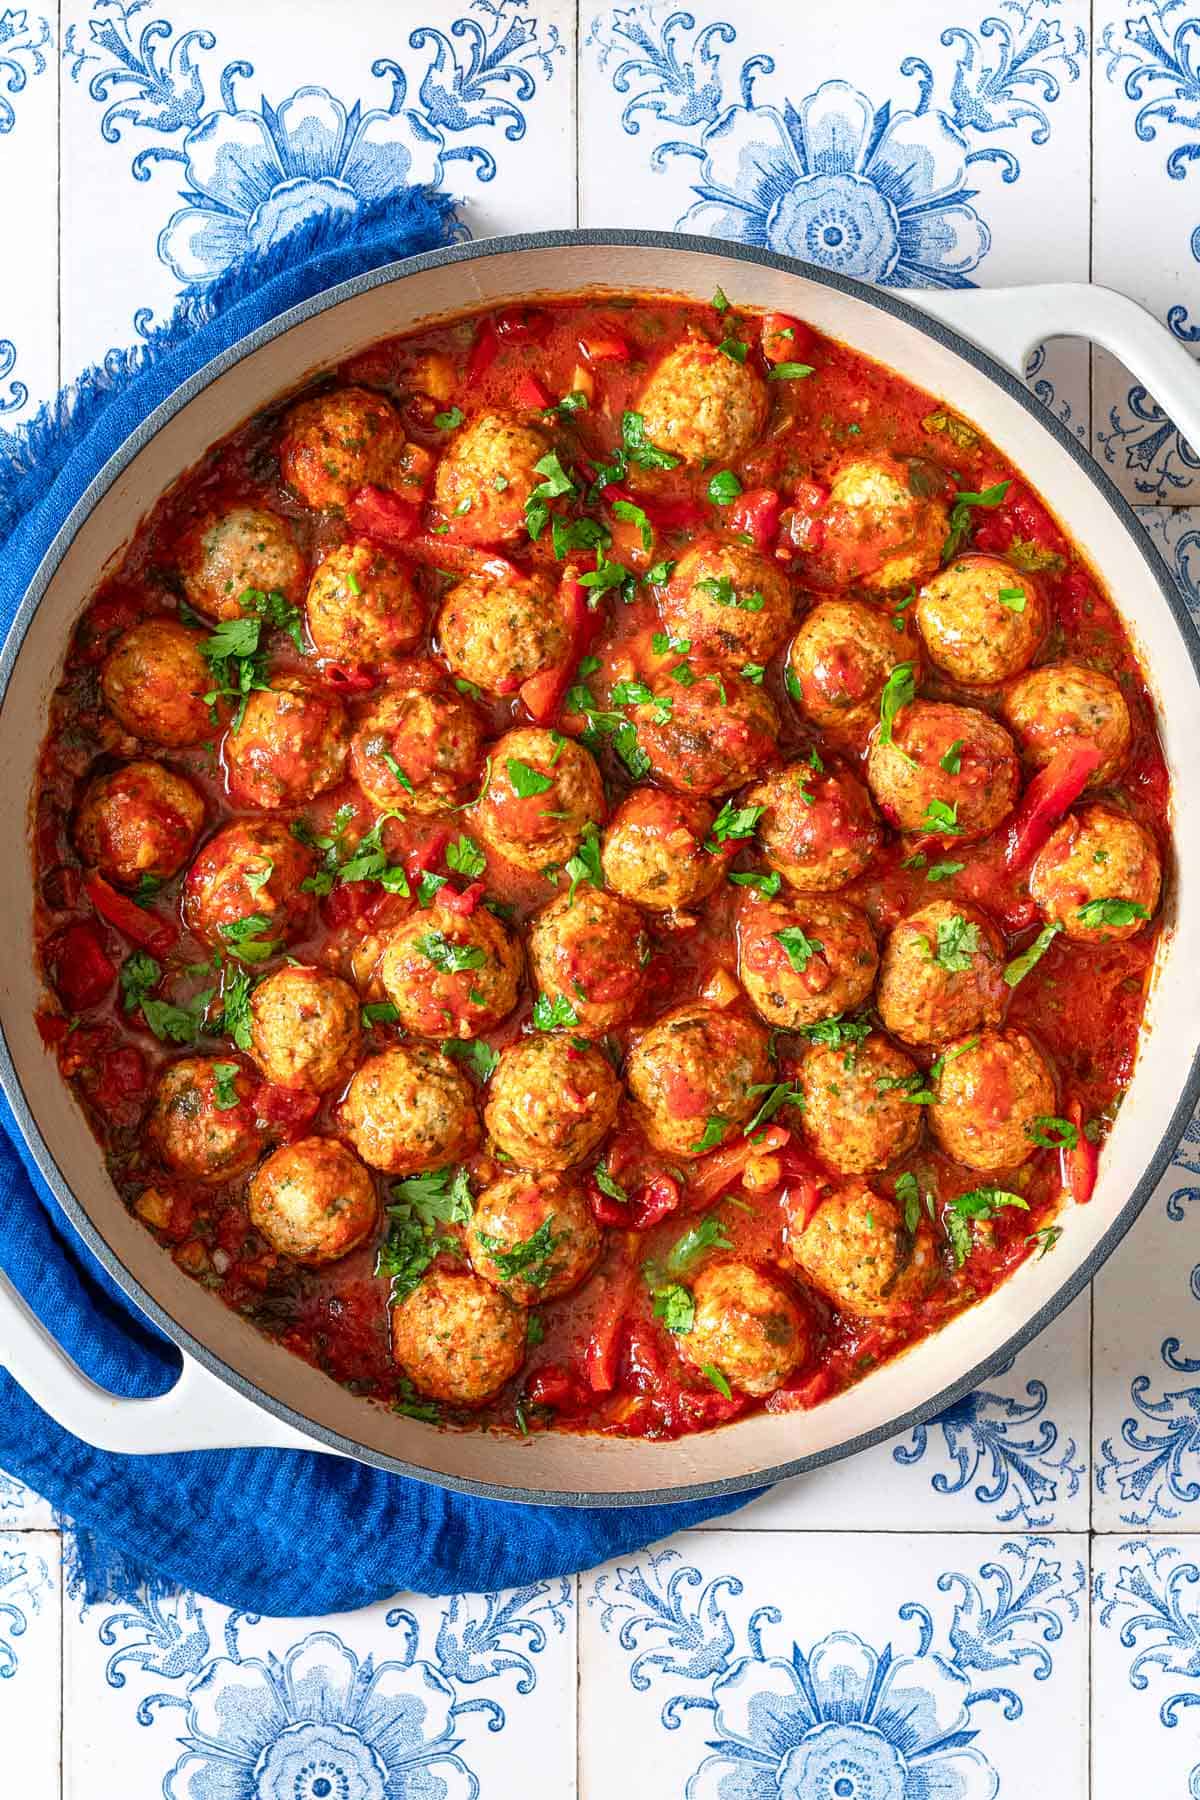 and overhead photo of moroccan fish kofta in a large pot next to a blue cloth napkin.